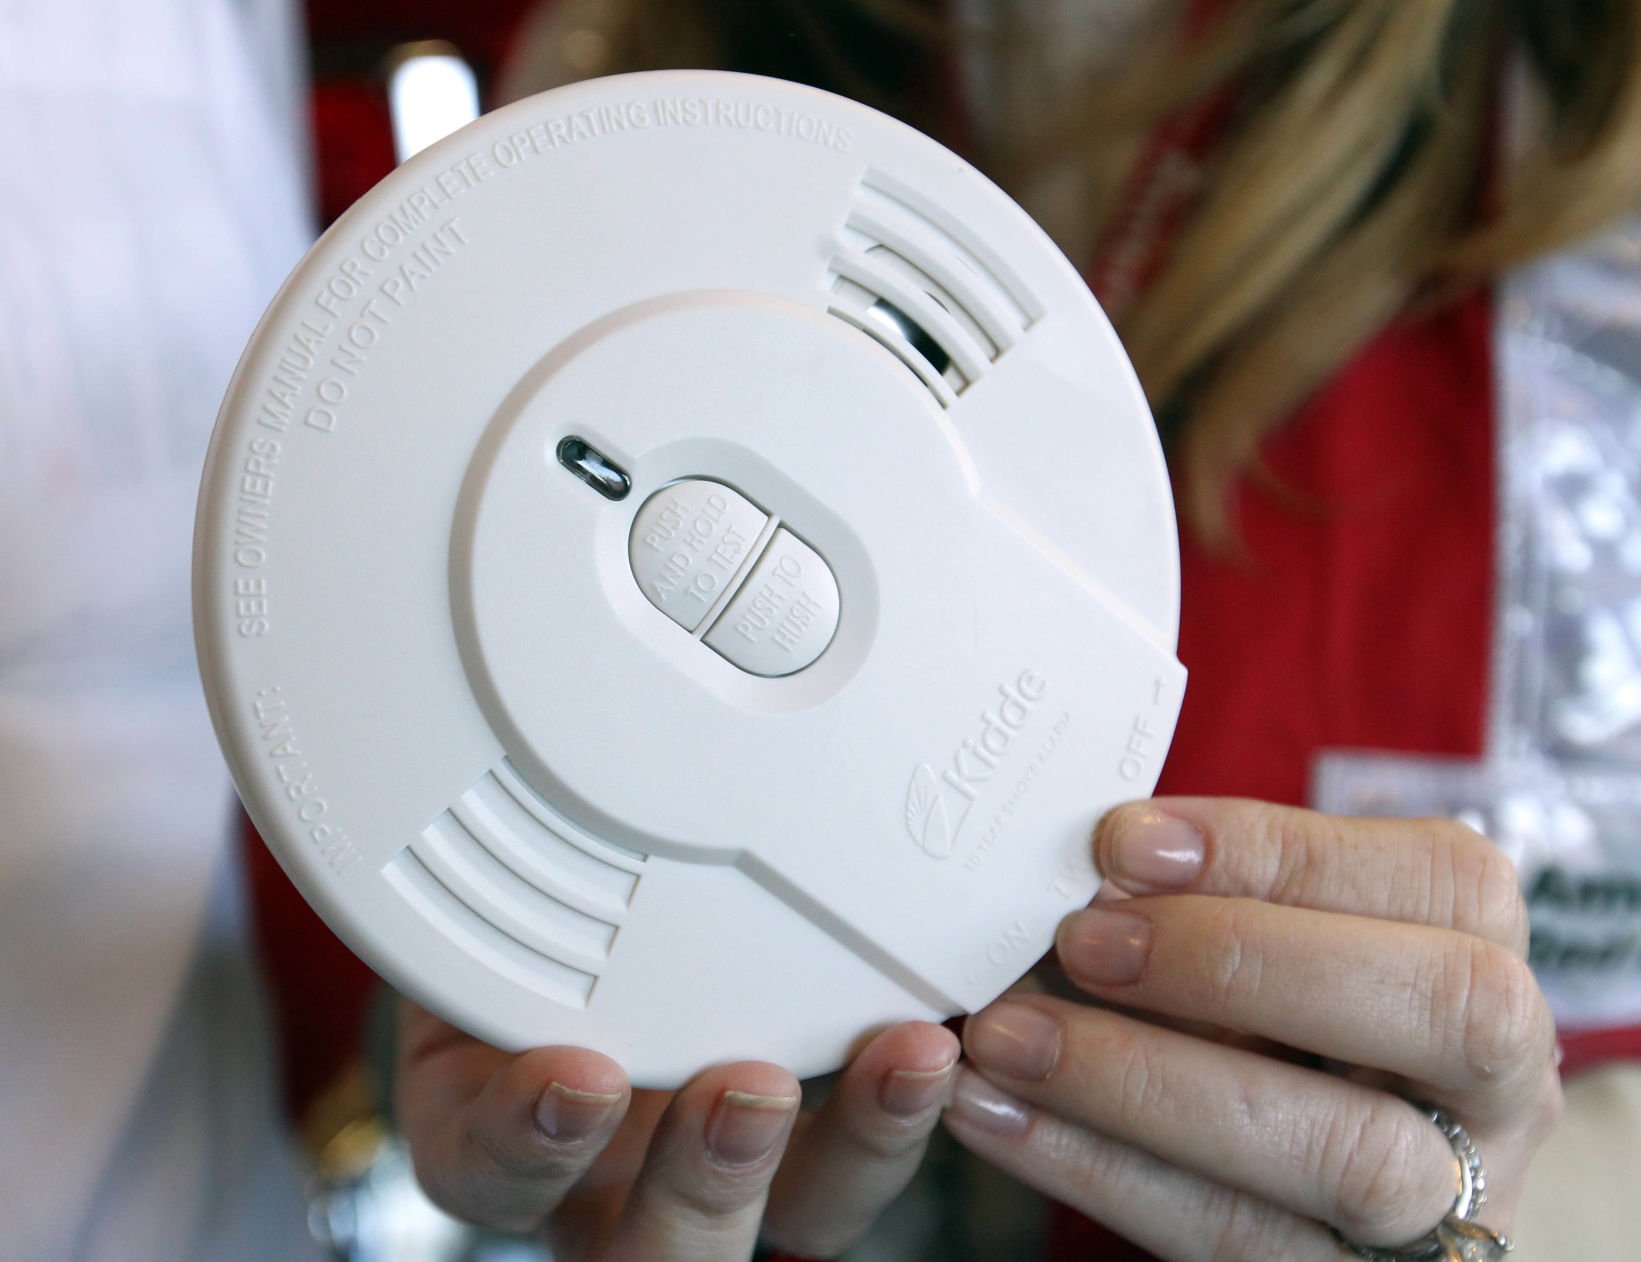 download american red cross smoke alarm request